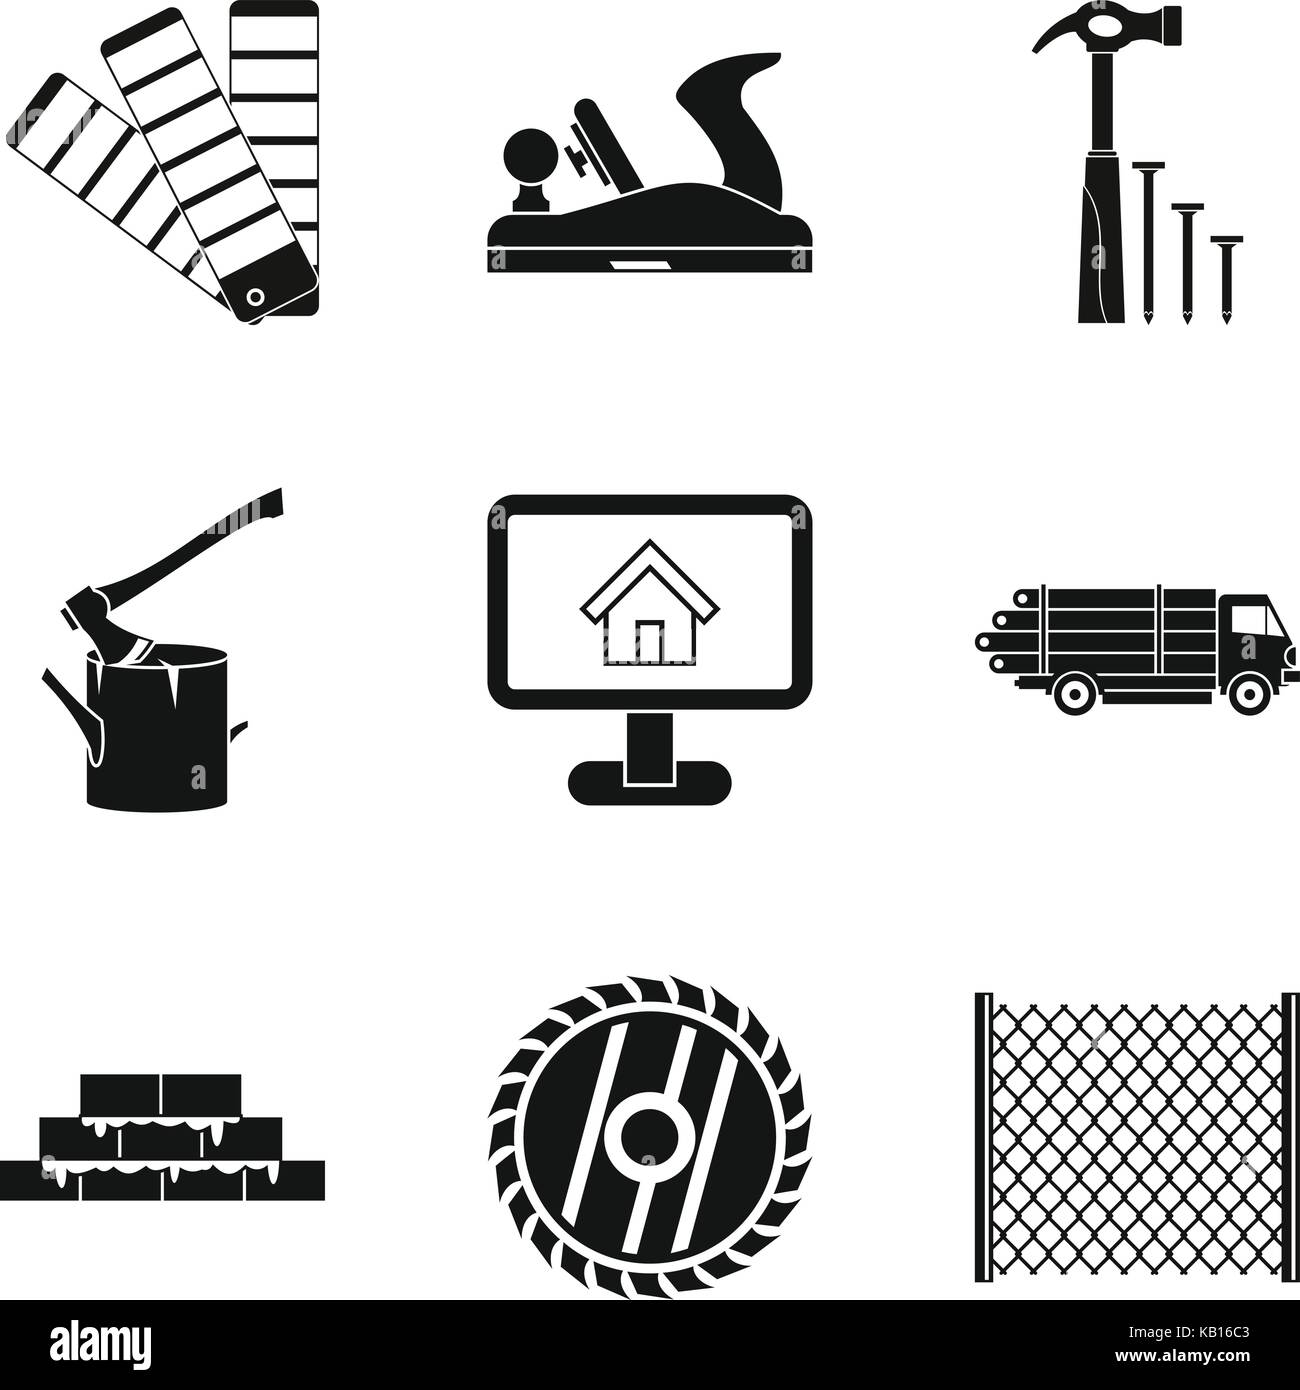 Material handling icons set, simple style Stock Vector